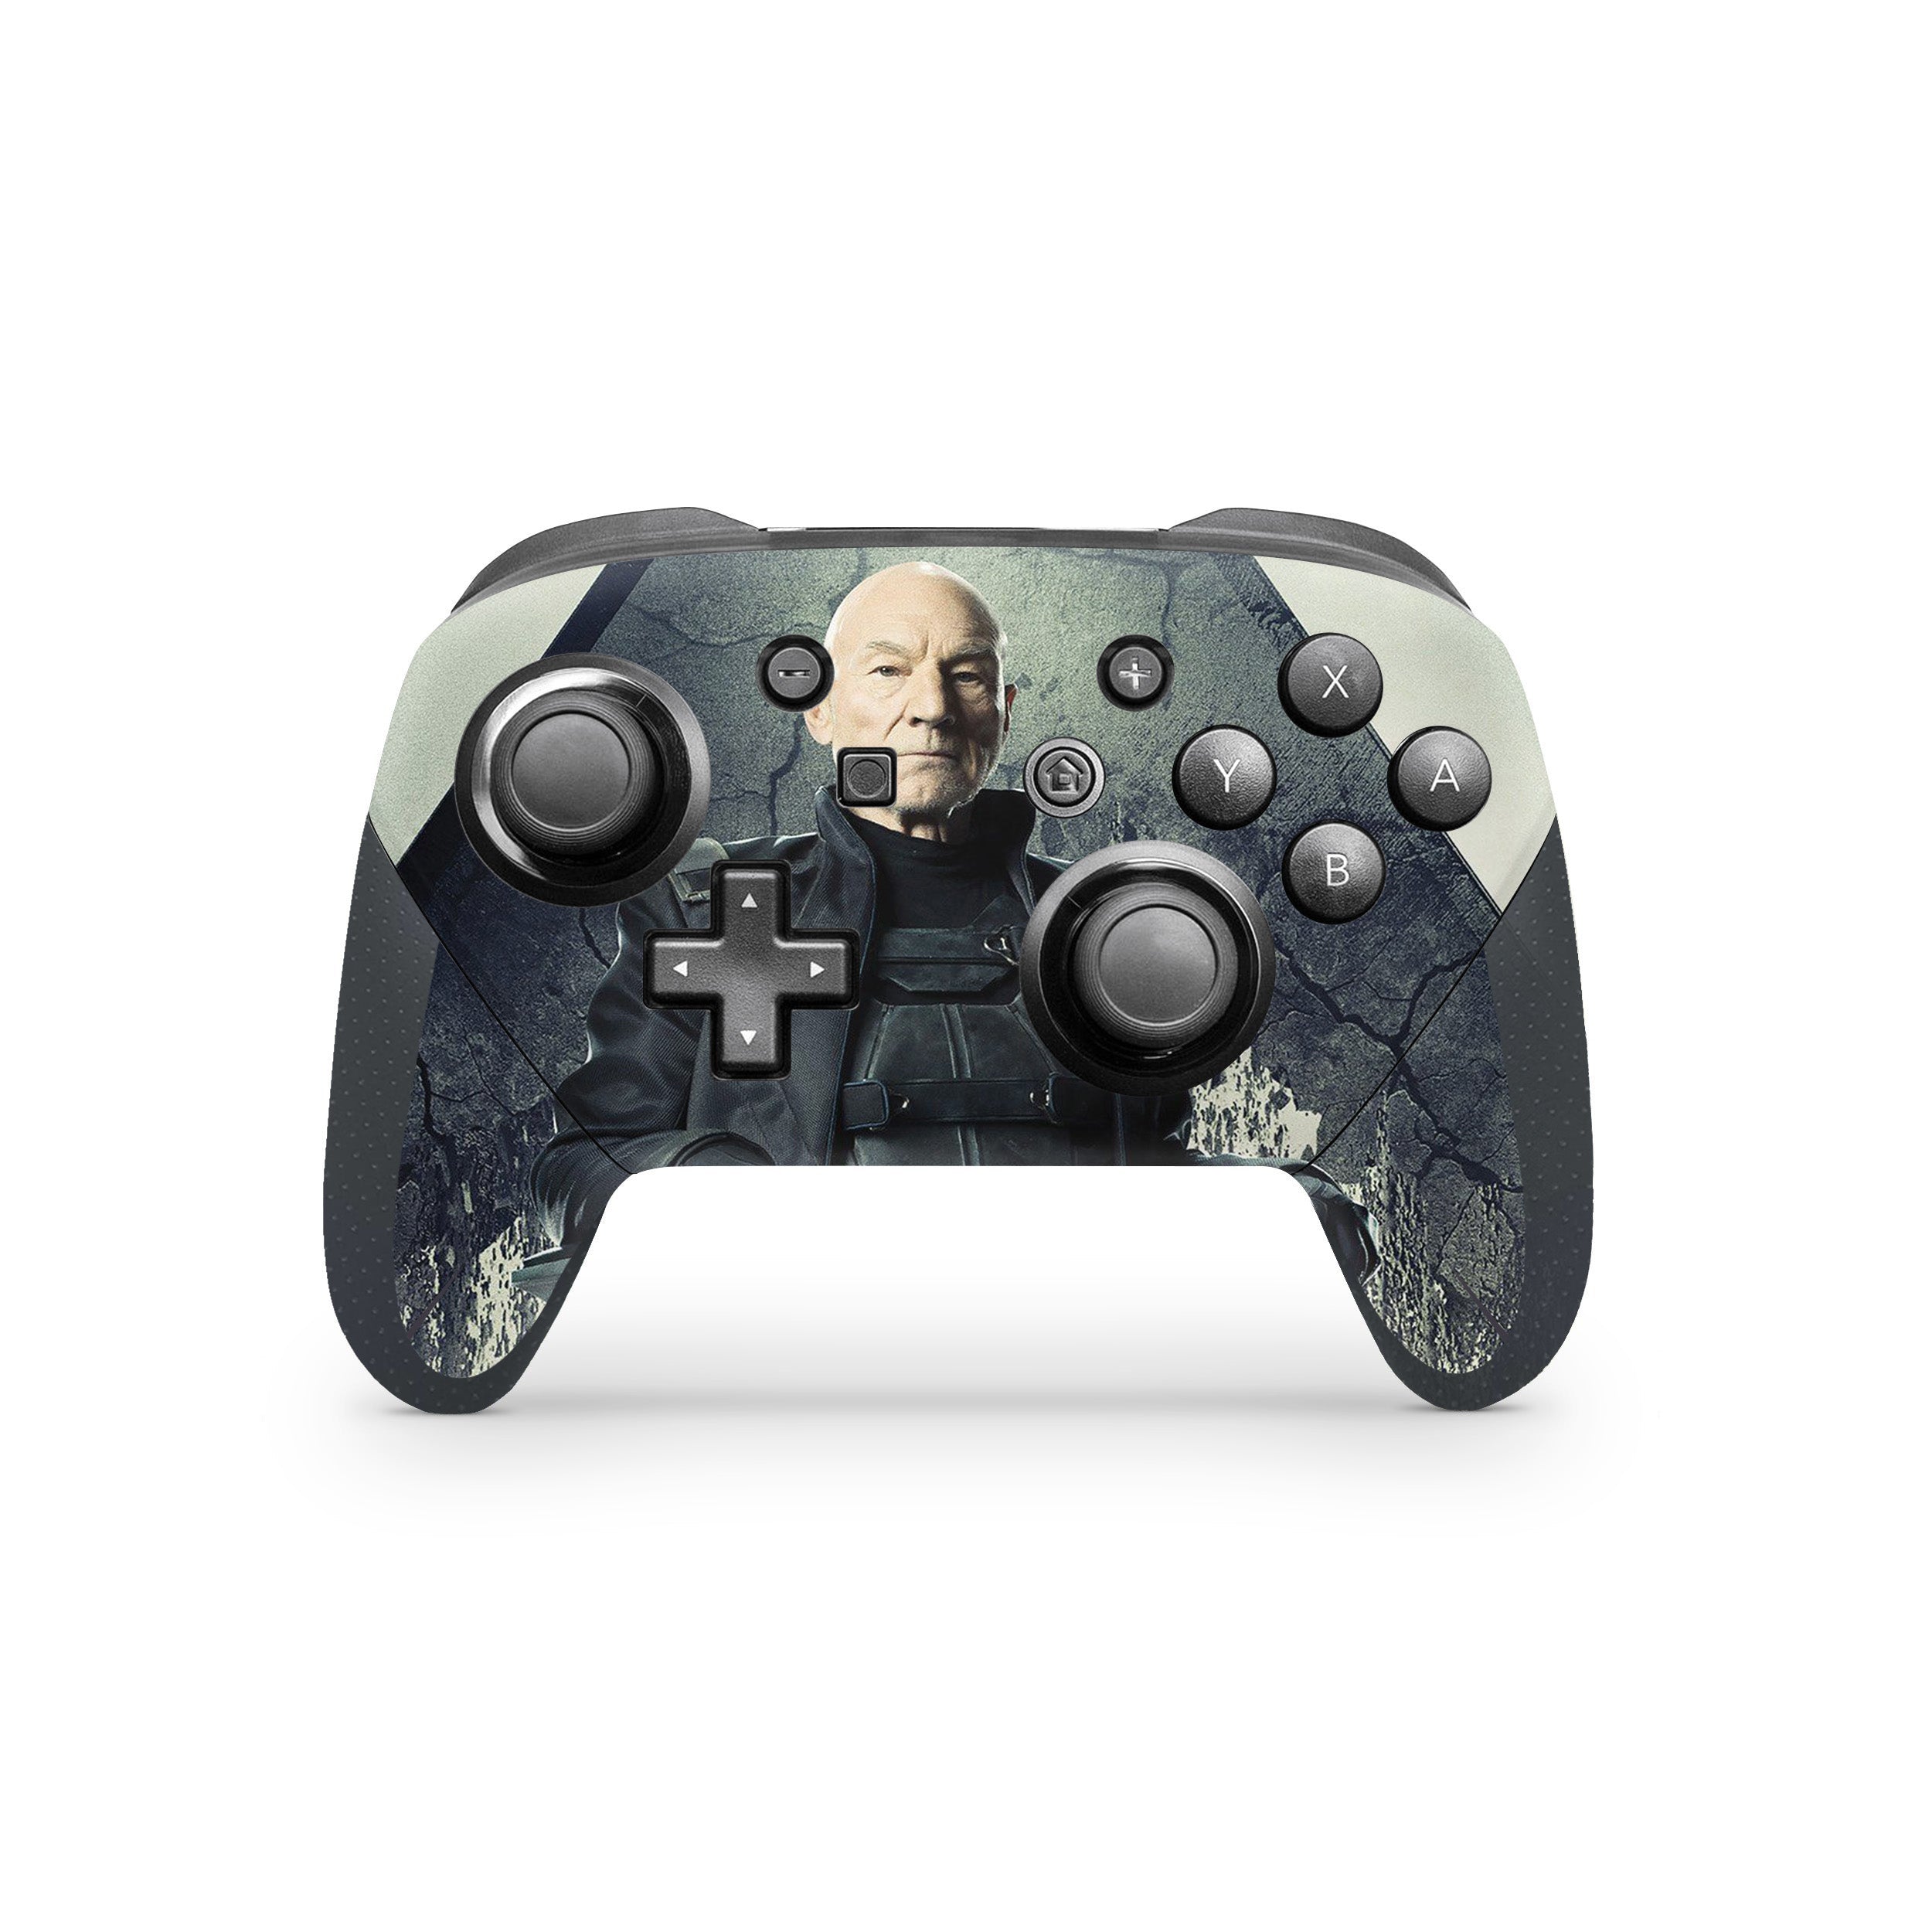 A video game skin featuring a Marvel X Men Professor X design for the Switch Pro Controller.